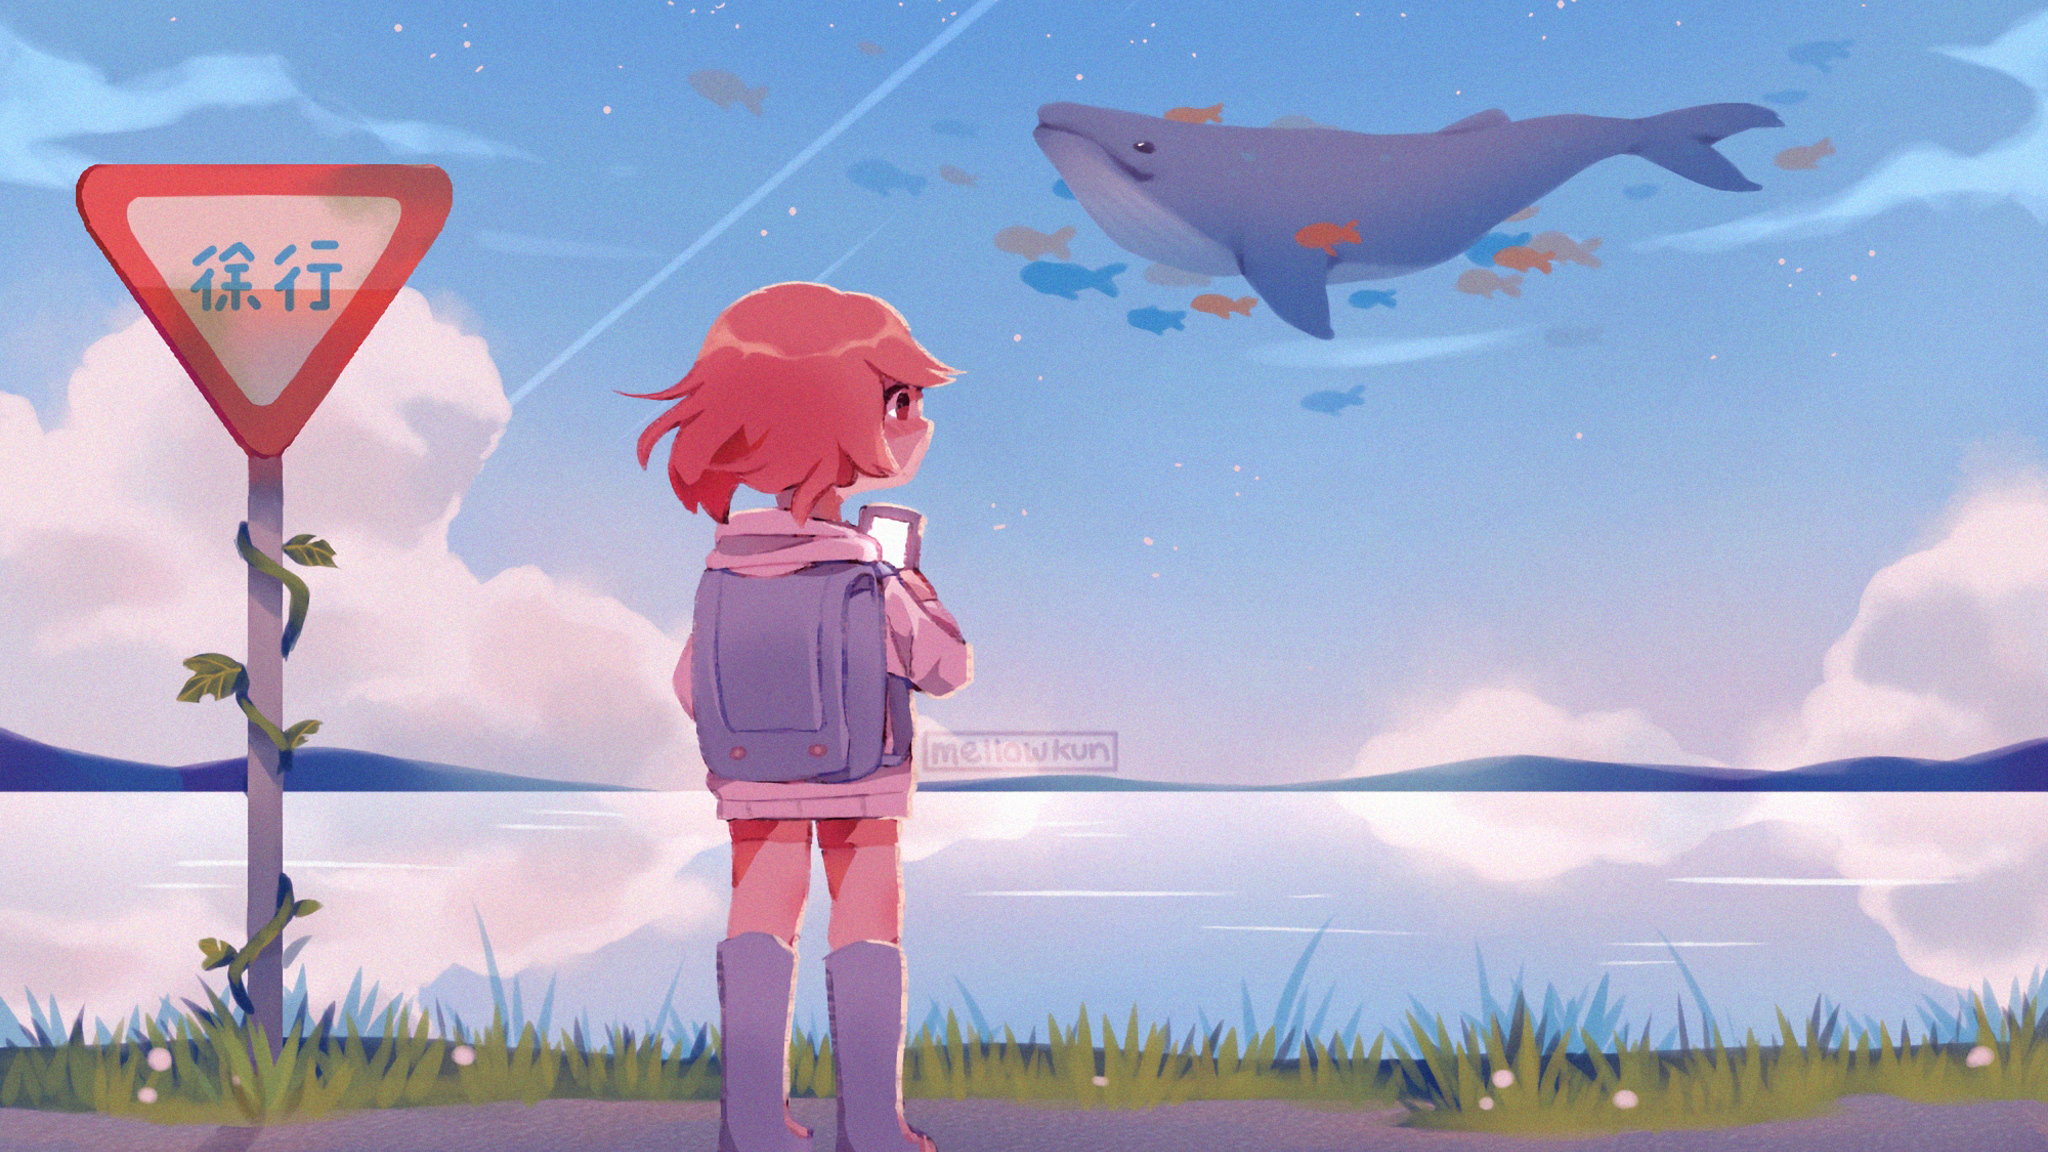 Anime 2048x1152 digital art artwork drawing digital painting anime anime girls women fantasy girl children landscape sign fantasy art animals clouds sky skyscape water sea reflection fish flying whale nature grass character design  environment concept art